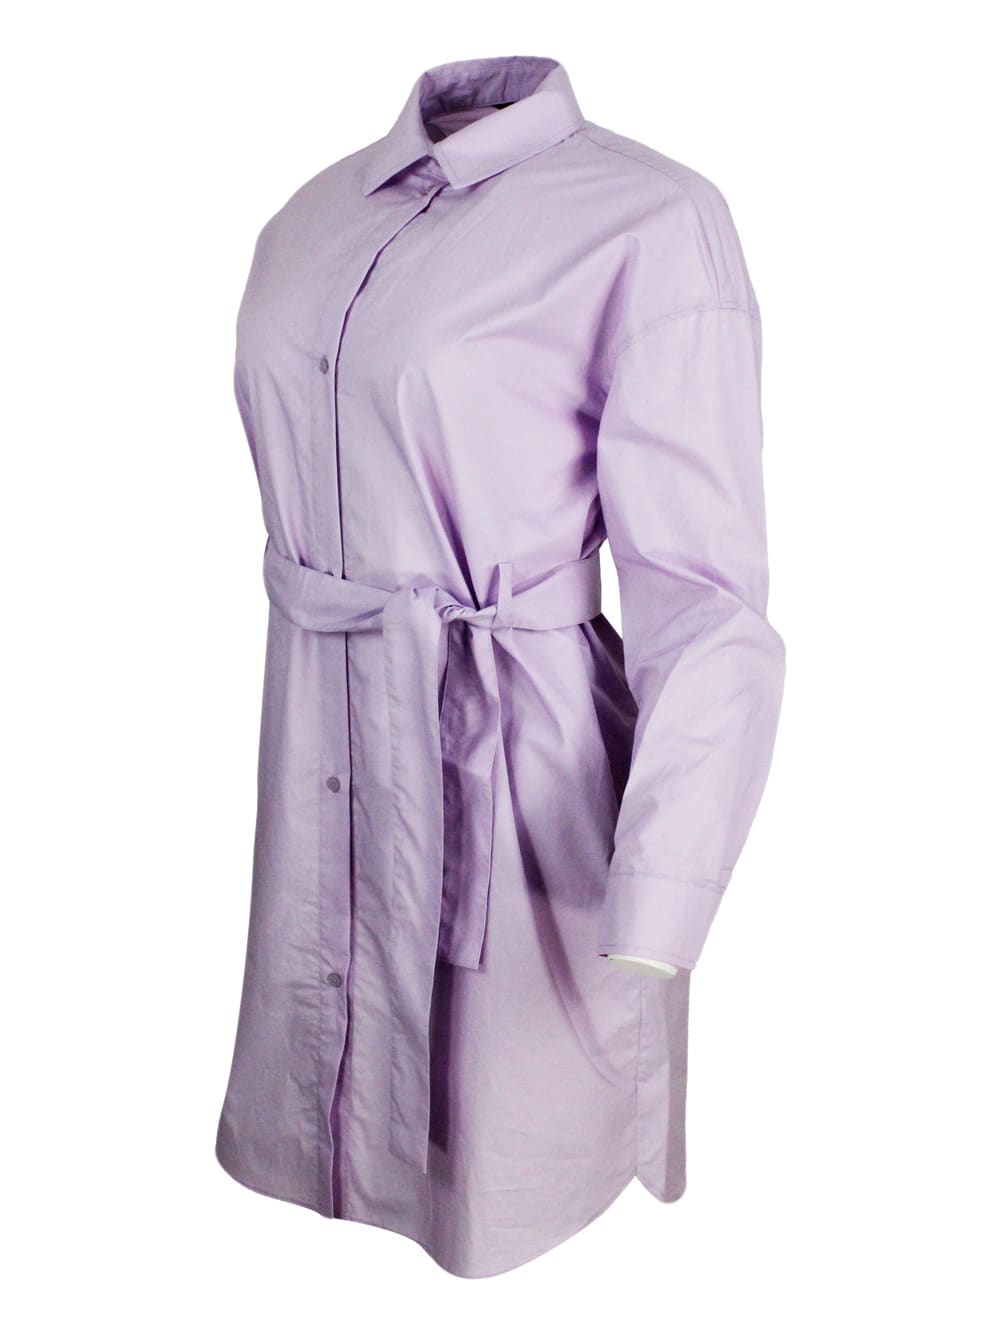 Shop Armani Collezioni Dress Made Of Soft Cotton With Long Sleeves, With Button Closure On The Front And Belt. In Pink